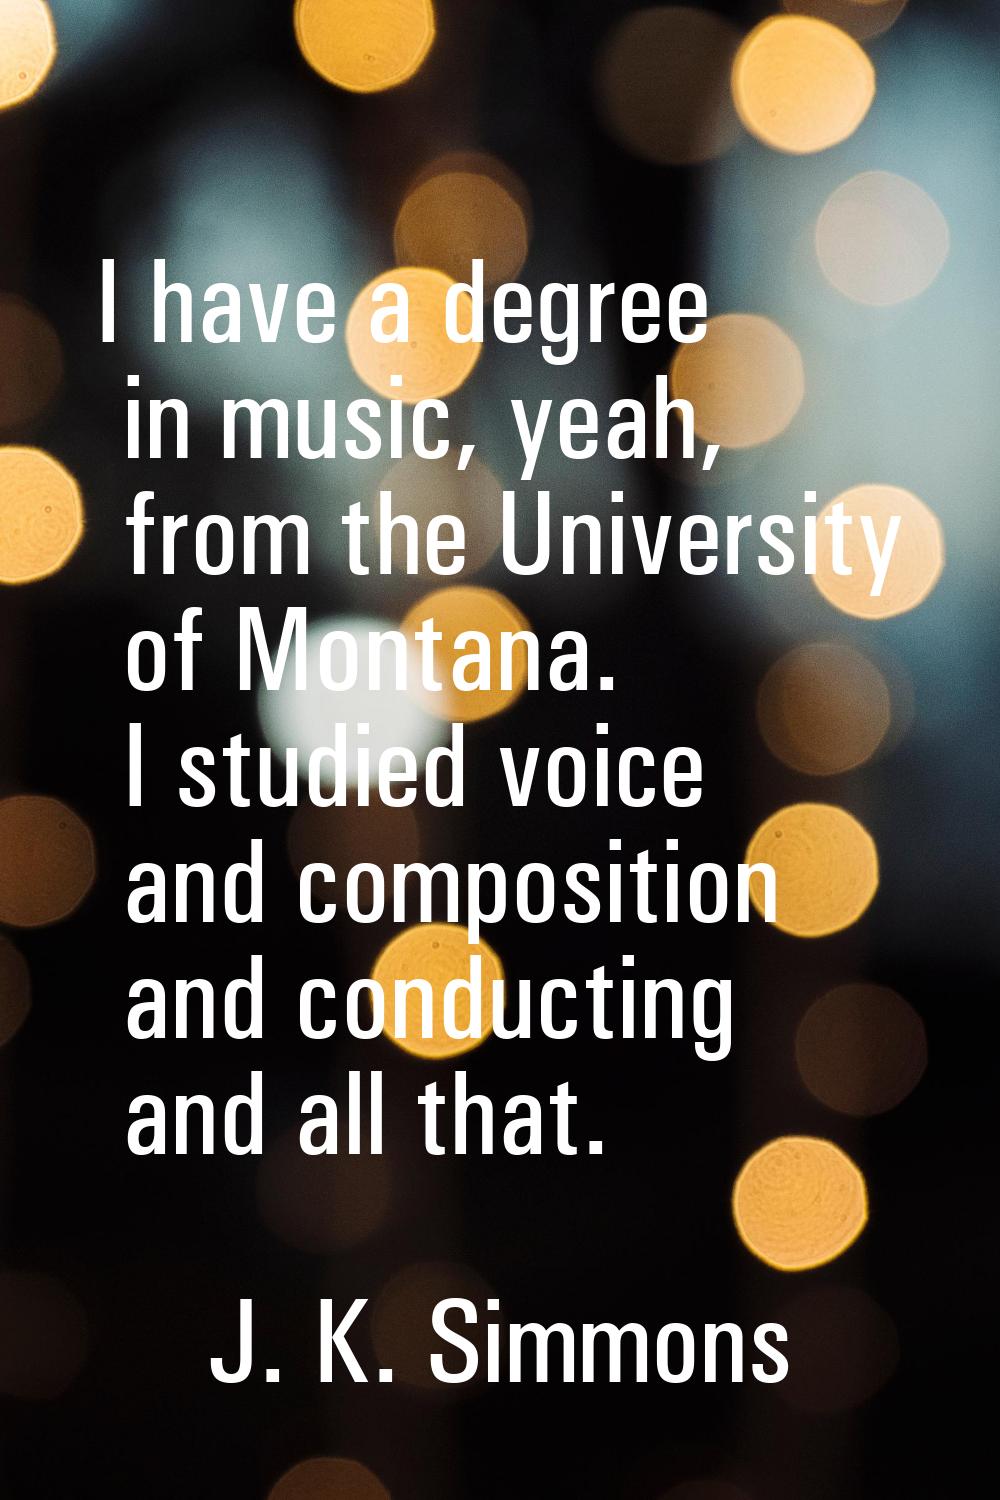 I have a degree in music, yeah, from the University of Montana. I studied voice and composition and